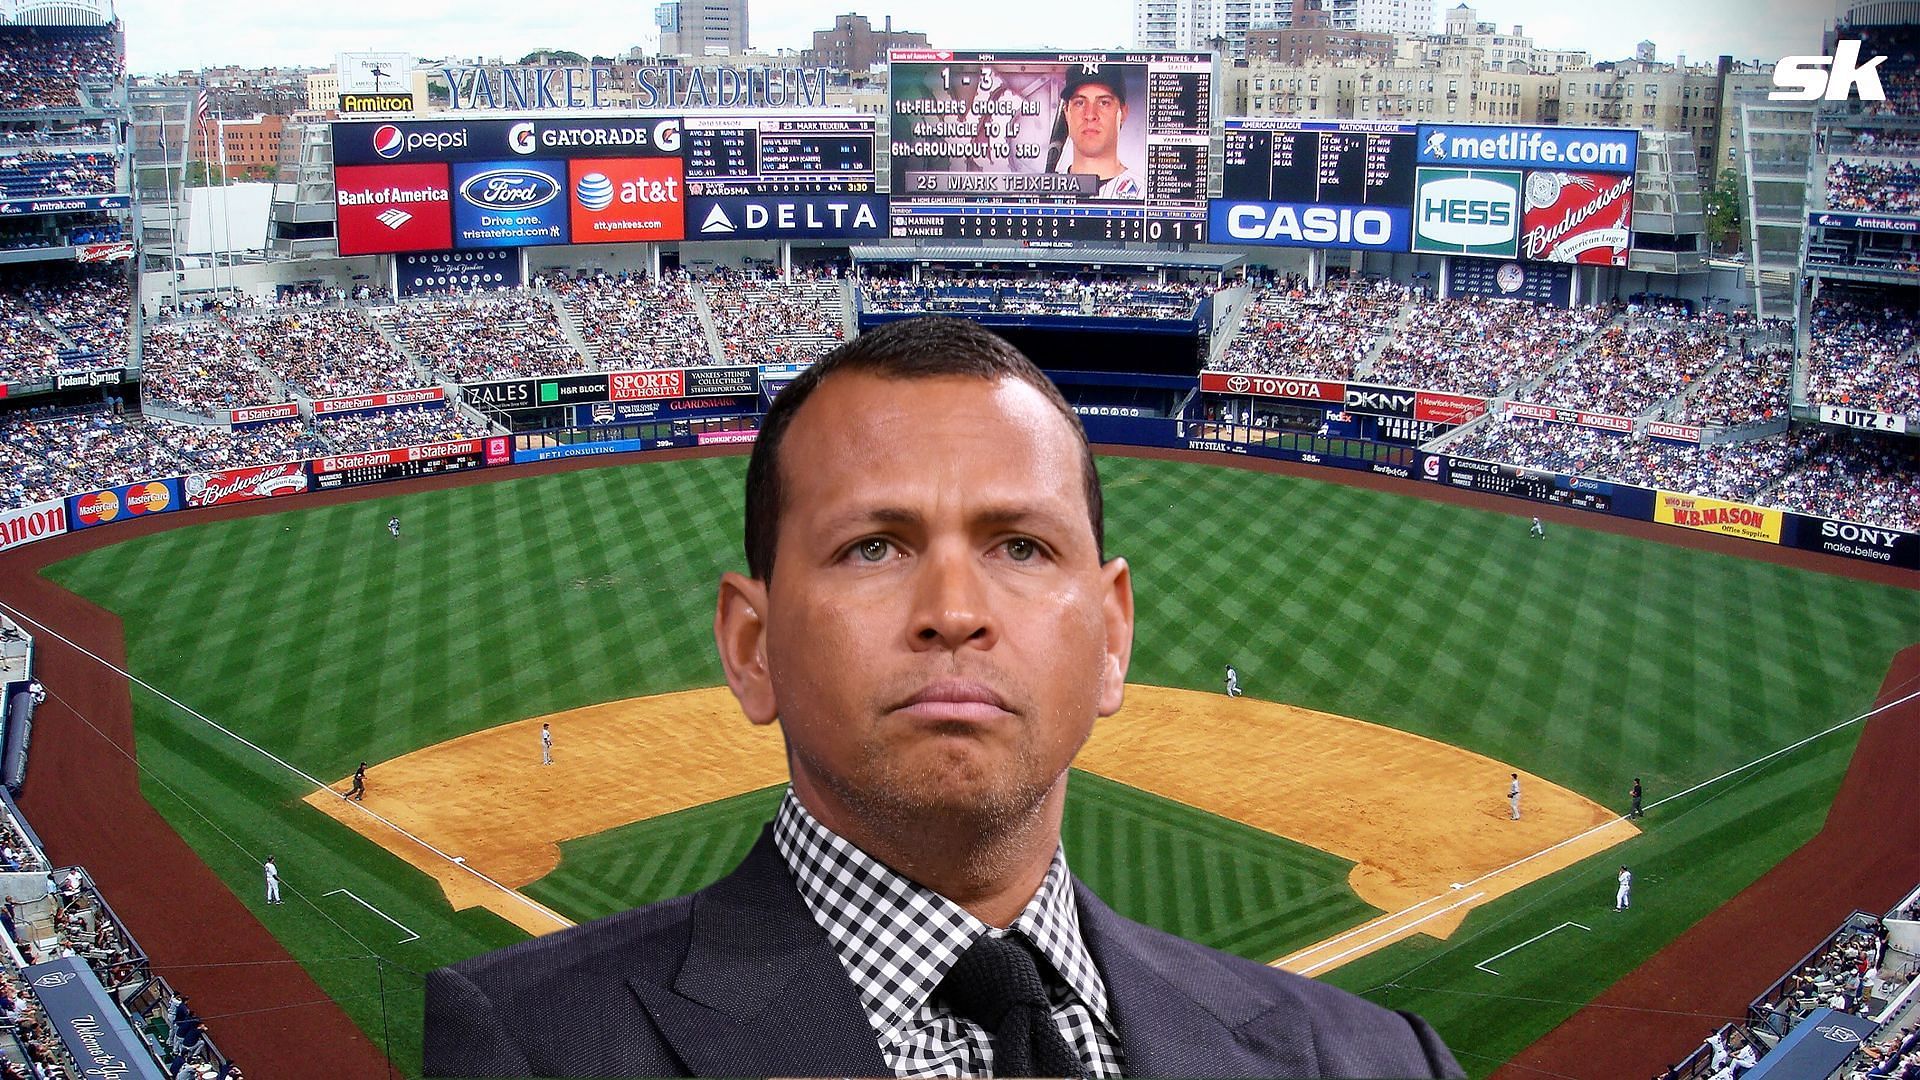 Alex Rodriguez assured that he is all clean